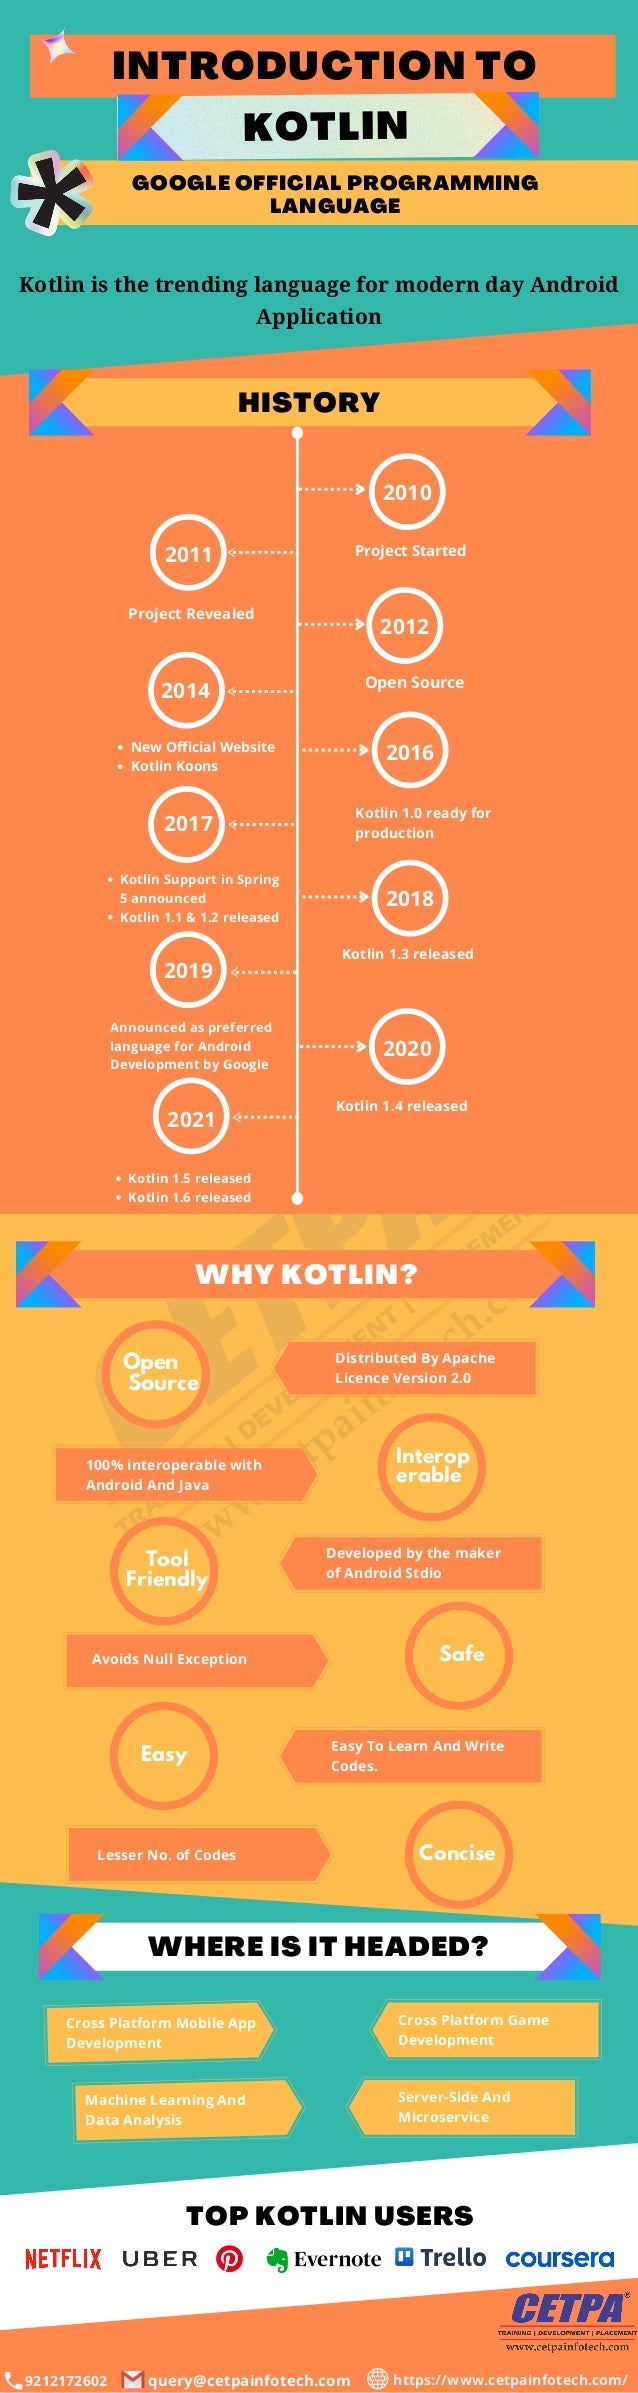 INTRODUCTION TO
GOOGLE OFFICIAL PROGRAMMING
LANGUAGE
KOTLIN
HISTORY
WHY KOTLIN?
WHERE IS IT HEADED?
TOP KOTLIN USERS
Kotlin is the trending language for modern day Android
Application
2010
2012
2011
2014
2016
2017
2018
2019
2020
2021
Project Started
Project Revealed
Open Source
New Official Website
Kotlin Koons
Kotlin 1.0 ready for
production
Kotlin Support in Spring
5 announced
Kotlin 1.1 & 1.2 released
Kotlin 1.3 released
Announced as preferred
language for Android
Development by Google
Kotlin 1.4 released
Kotlin 1.5 released
Kotlin 1.6 released
Open
Source
Interop
erable
Tool
Friendly
Safe
Easy
Concise
Distributed By Apache
Licence Version 2.0
100% interoperable with
Android And Java
Developed by the maker
of Android Stdio
Avoids Null Exception
Easy To Learn And Write
Codes.
Lesser No. of Codes
Cross Platform Mobile App
Development
Machine Learning And
Data Analysis
Cross Platform Game
Development
Server-Side And
Microservice
9212172602 query@cetpainfotech.com https://www.cetpainfotech.com/
 